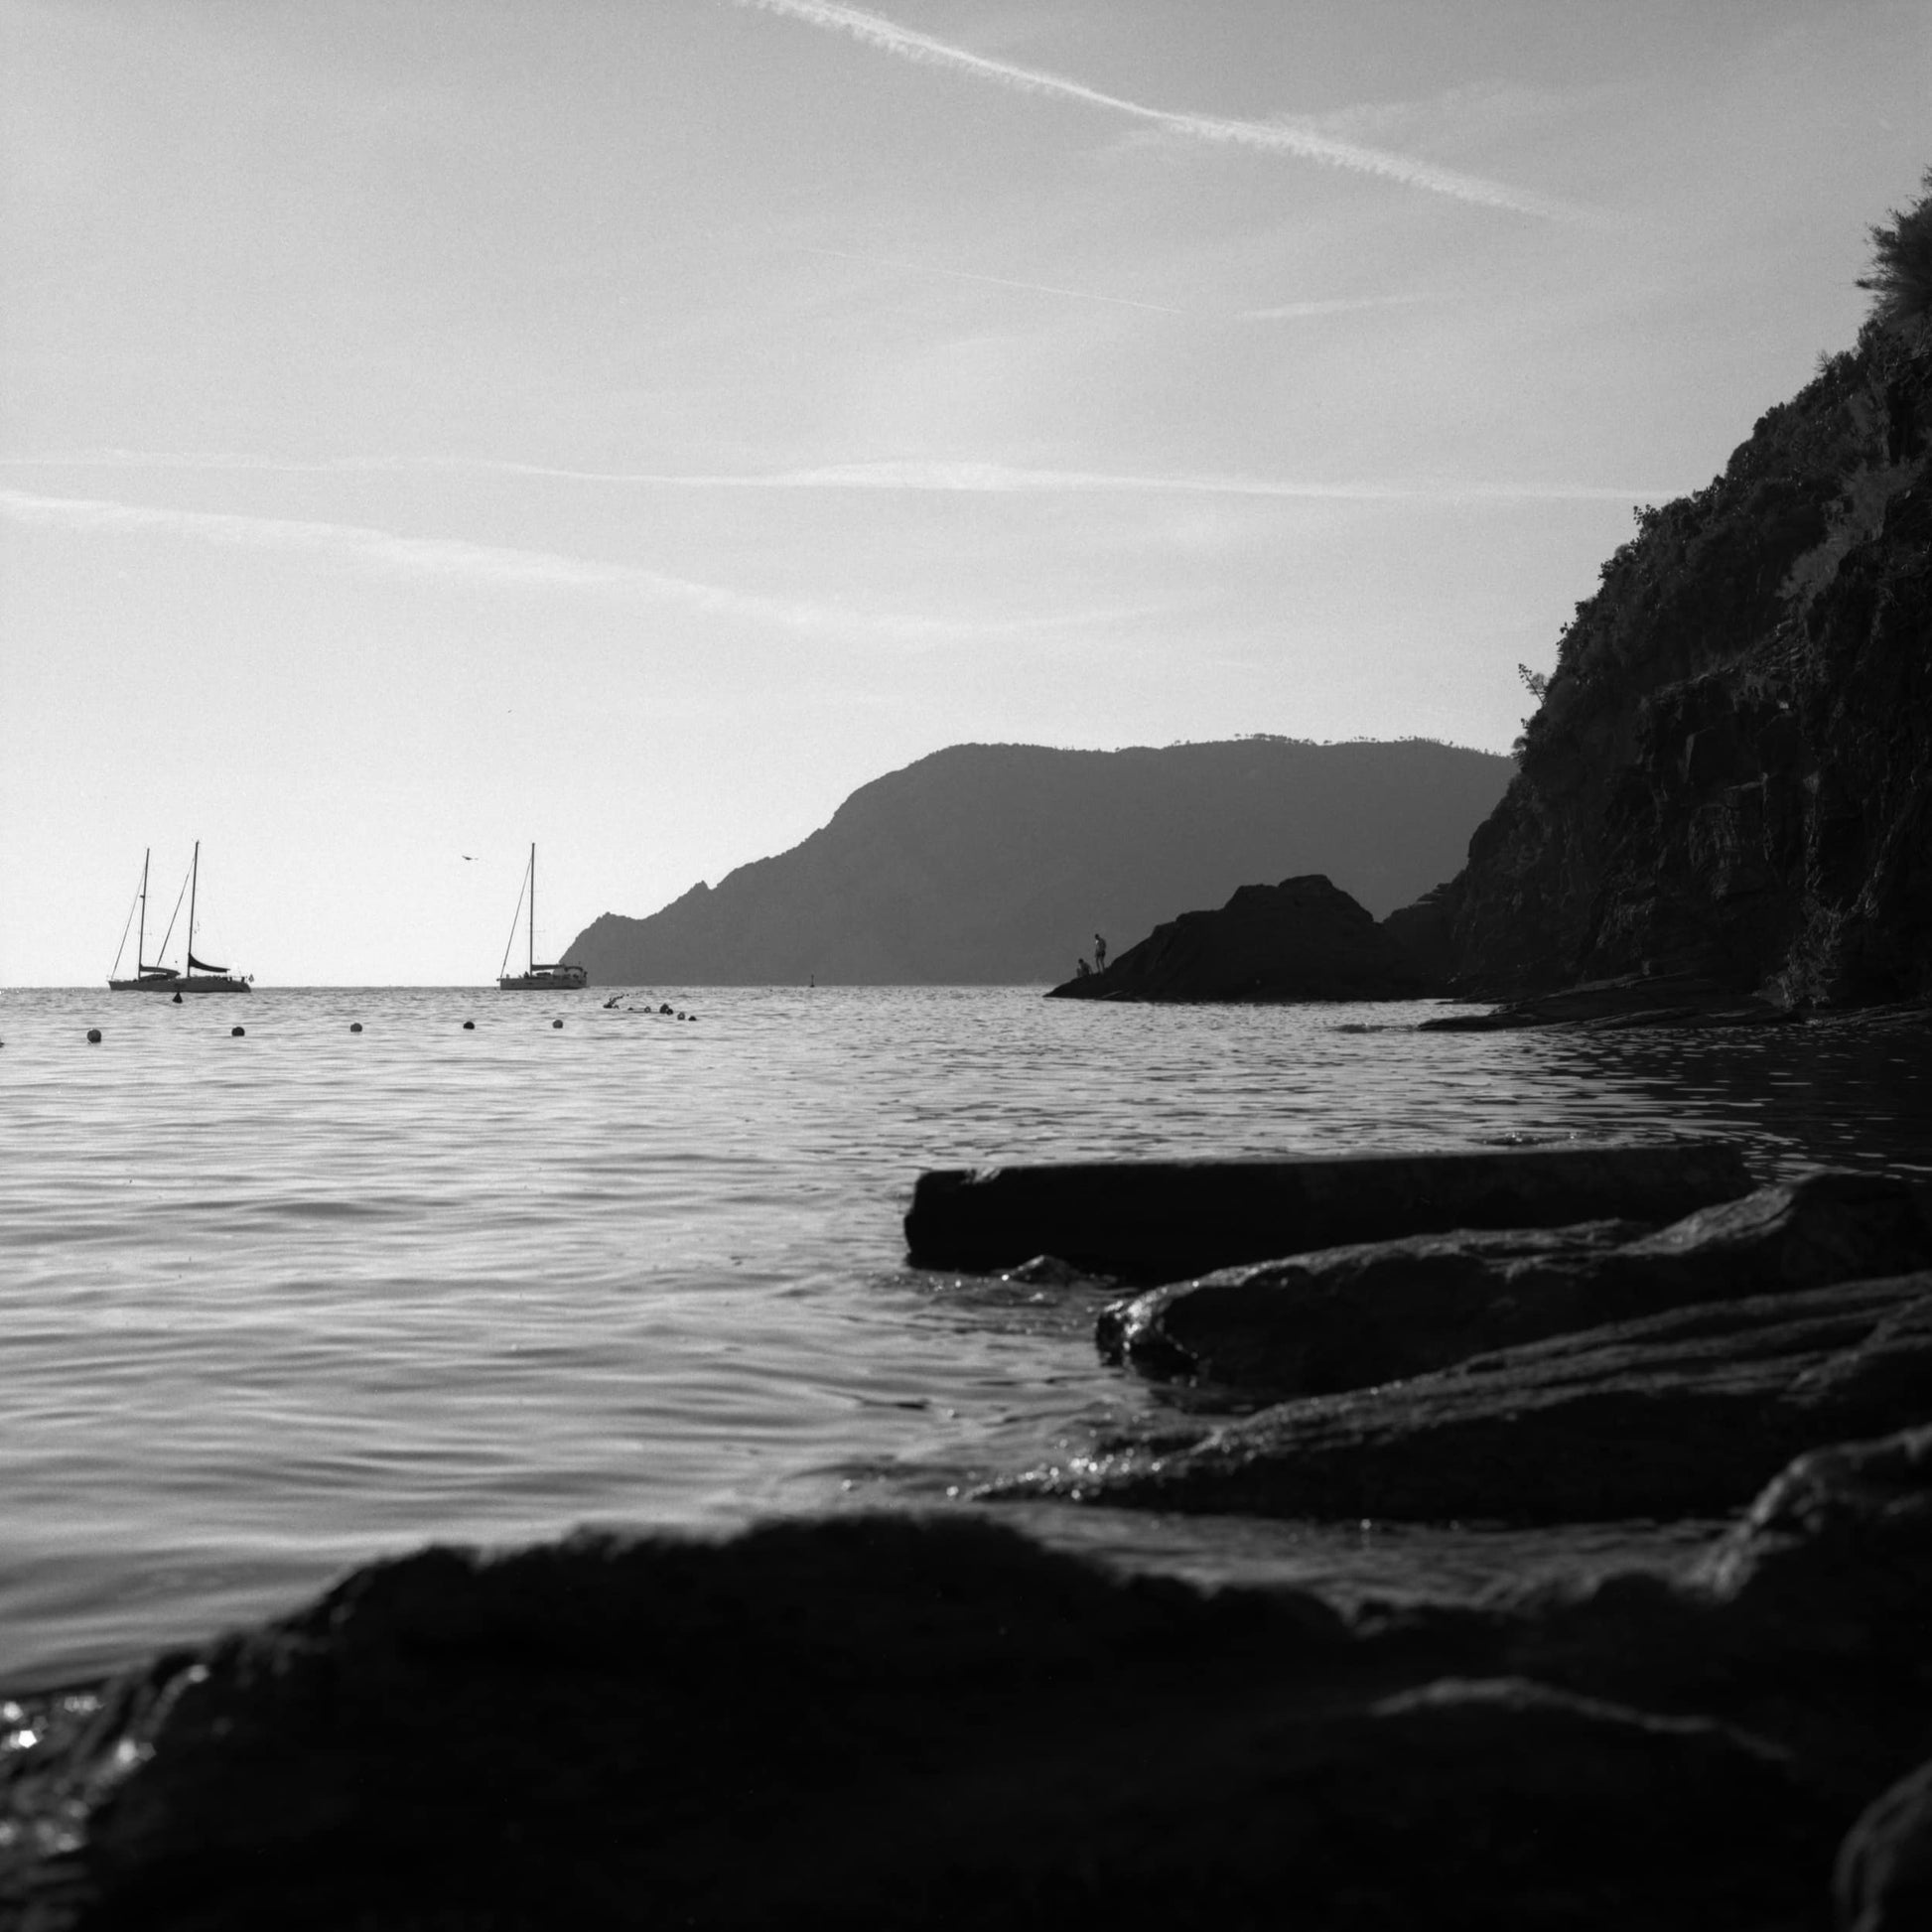 The fine-art piece 'Mar Ligure Incolore' by Tom Kluyver a rocky coastline, with two people standing on the rocks in the distance, photographed in black and white.